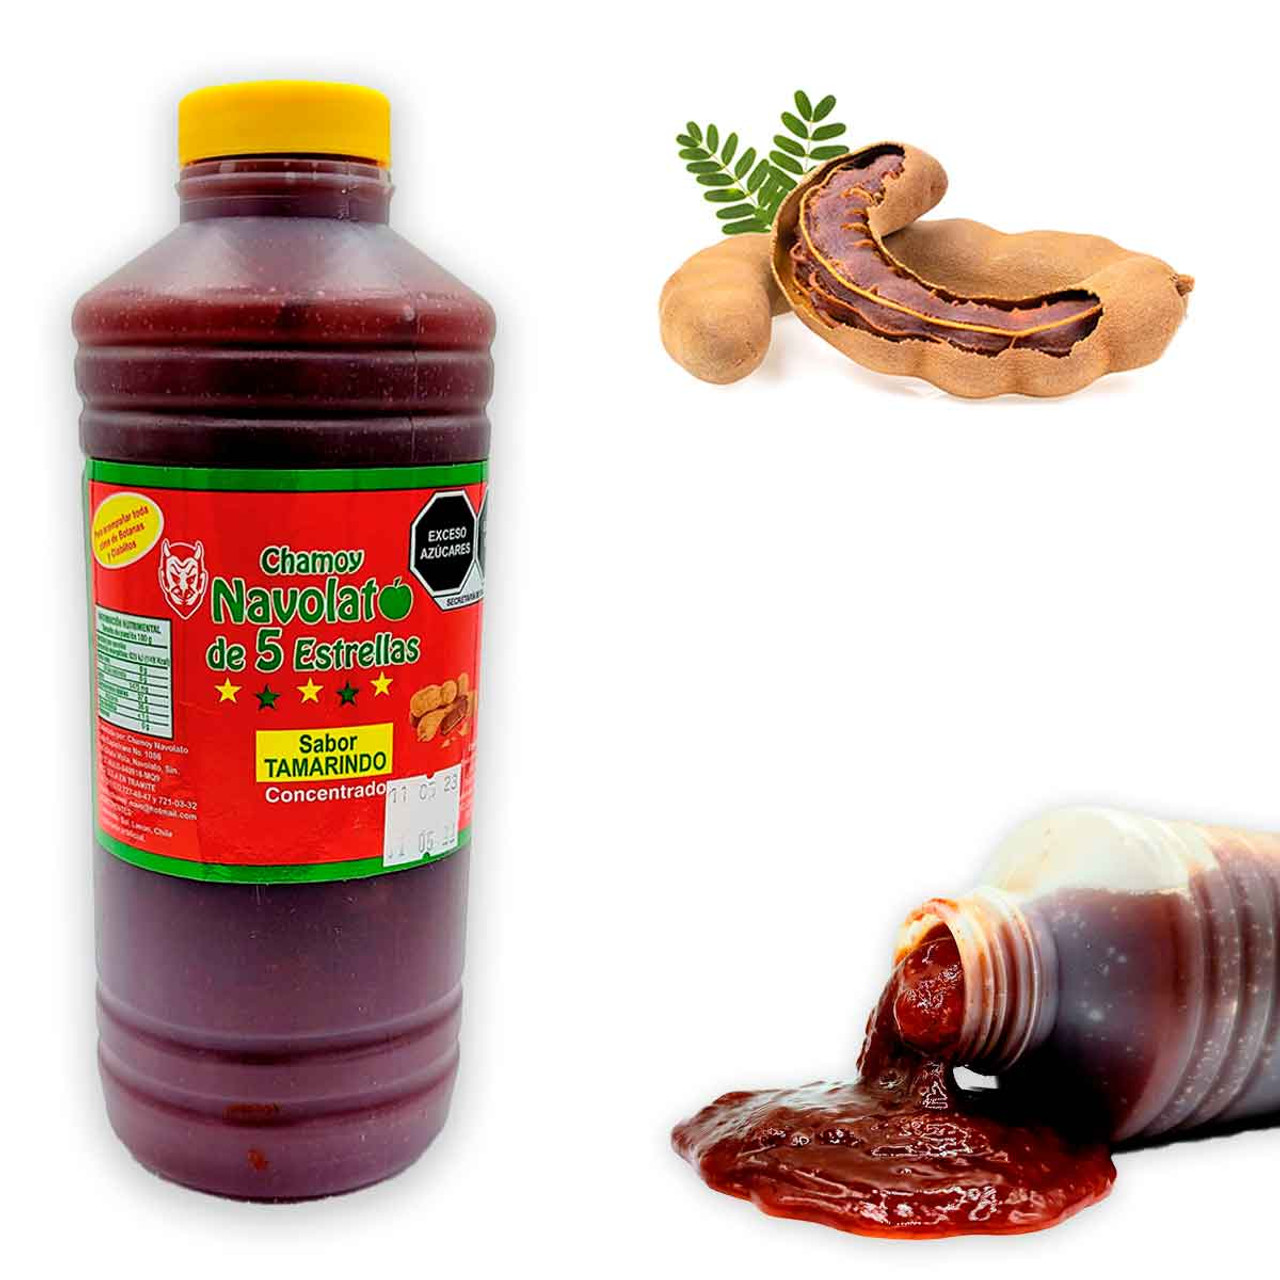 This is a delicious liquid seasoning sauce made with the rich essences of chamoy and tamarind.